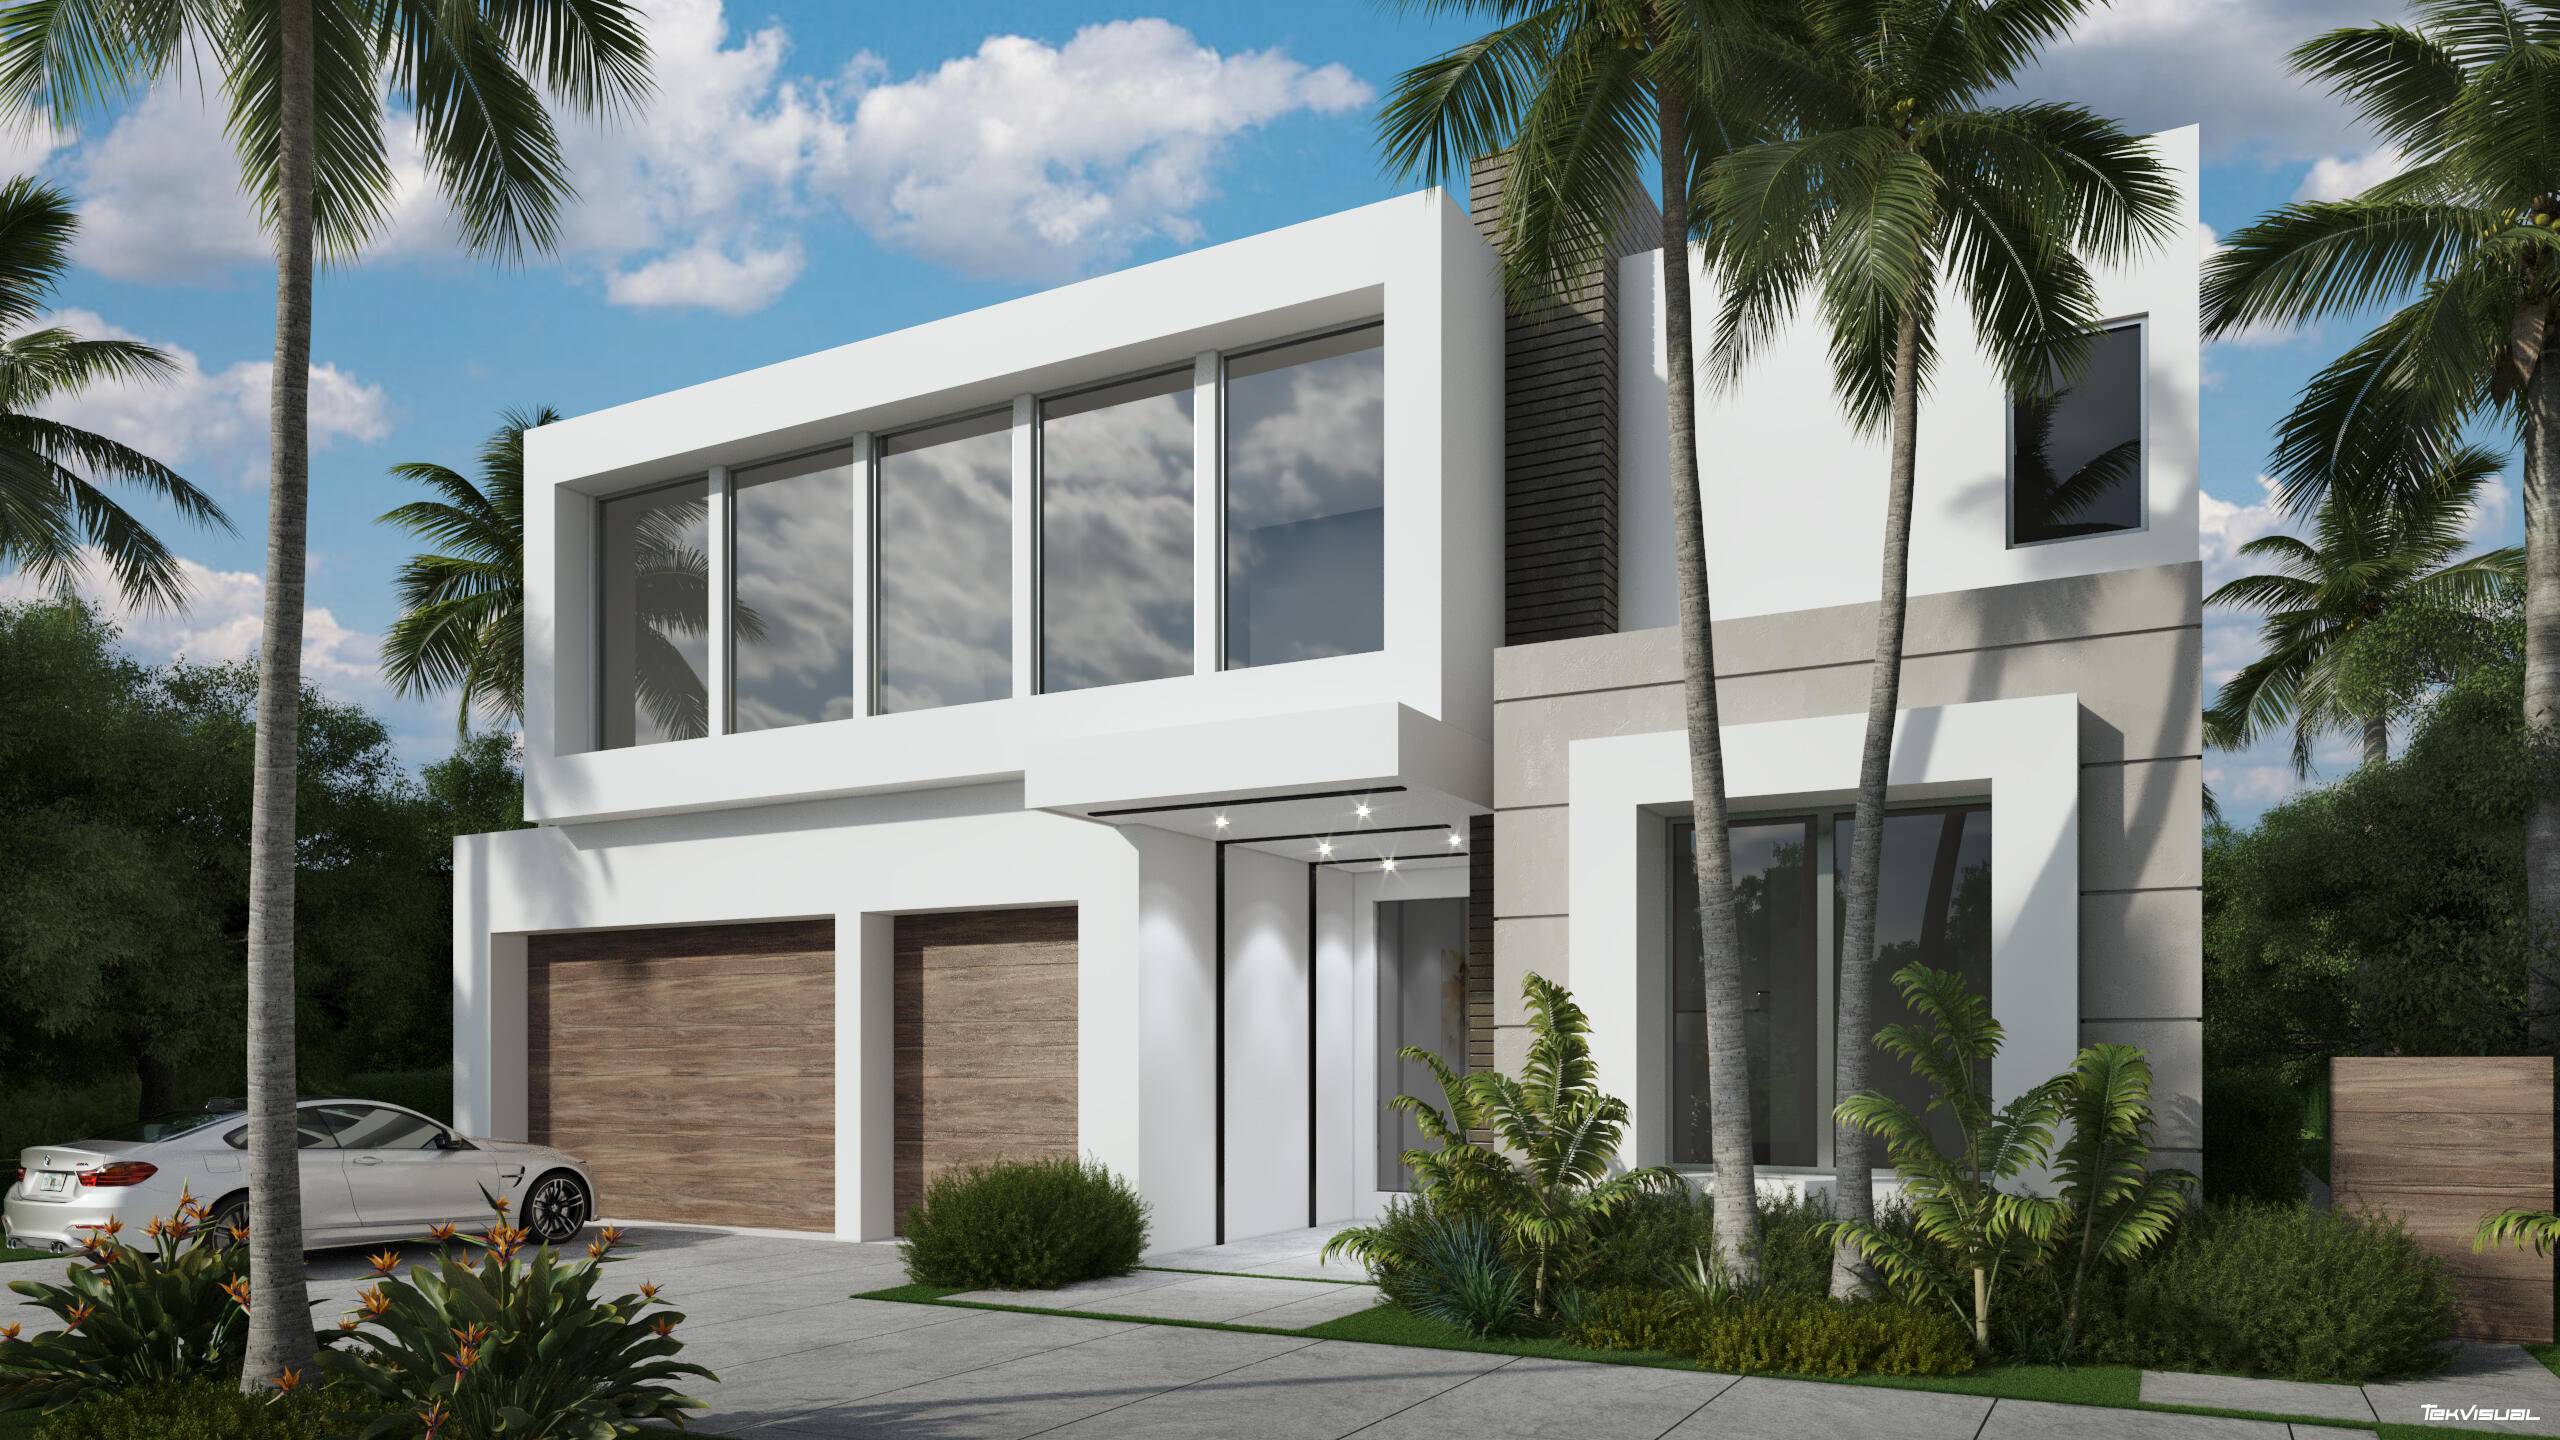 East Boca, amazing location, near the new Brightline station, walking distance to Mizner downtown Boca with great restaurants and entertainment close by.